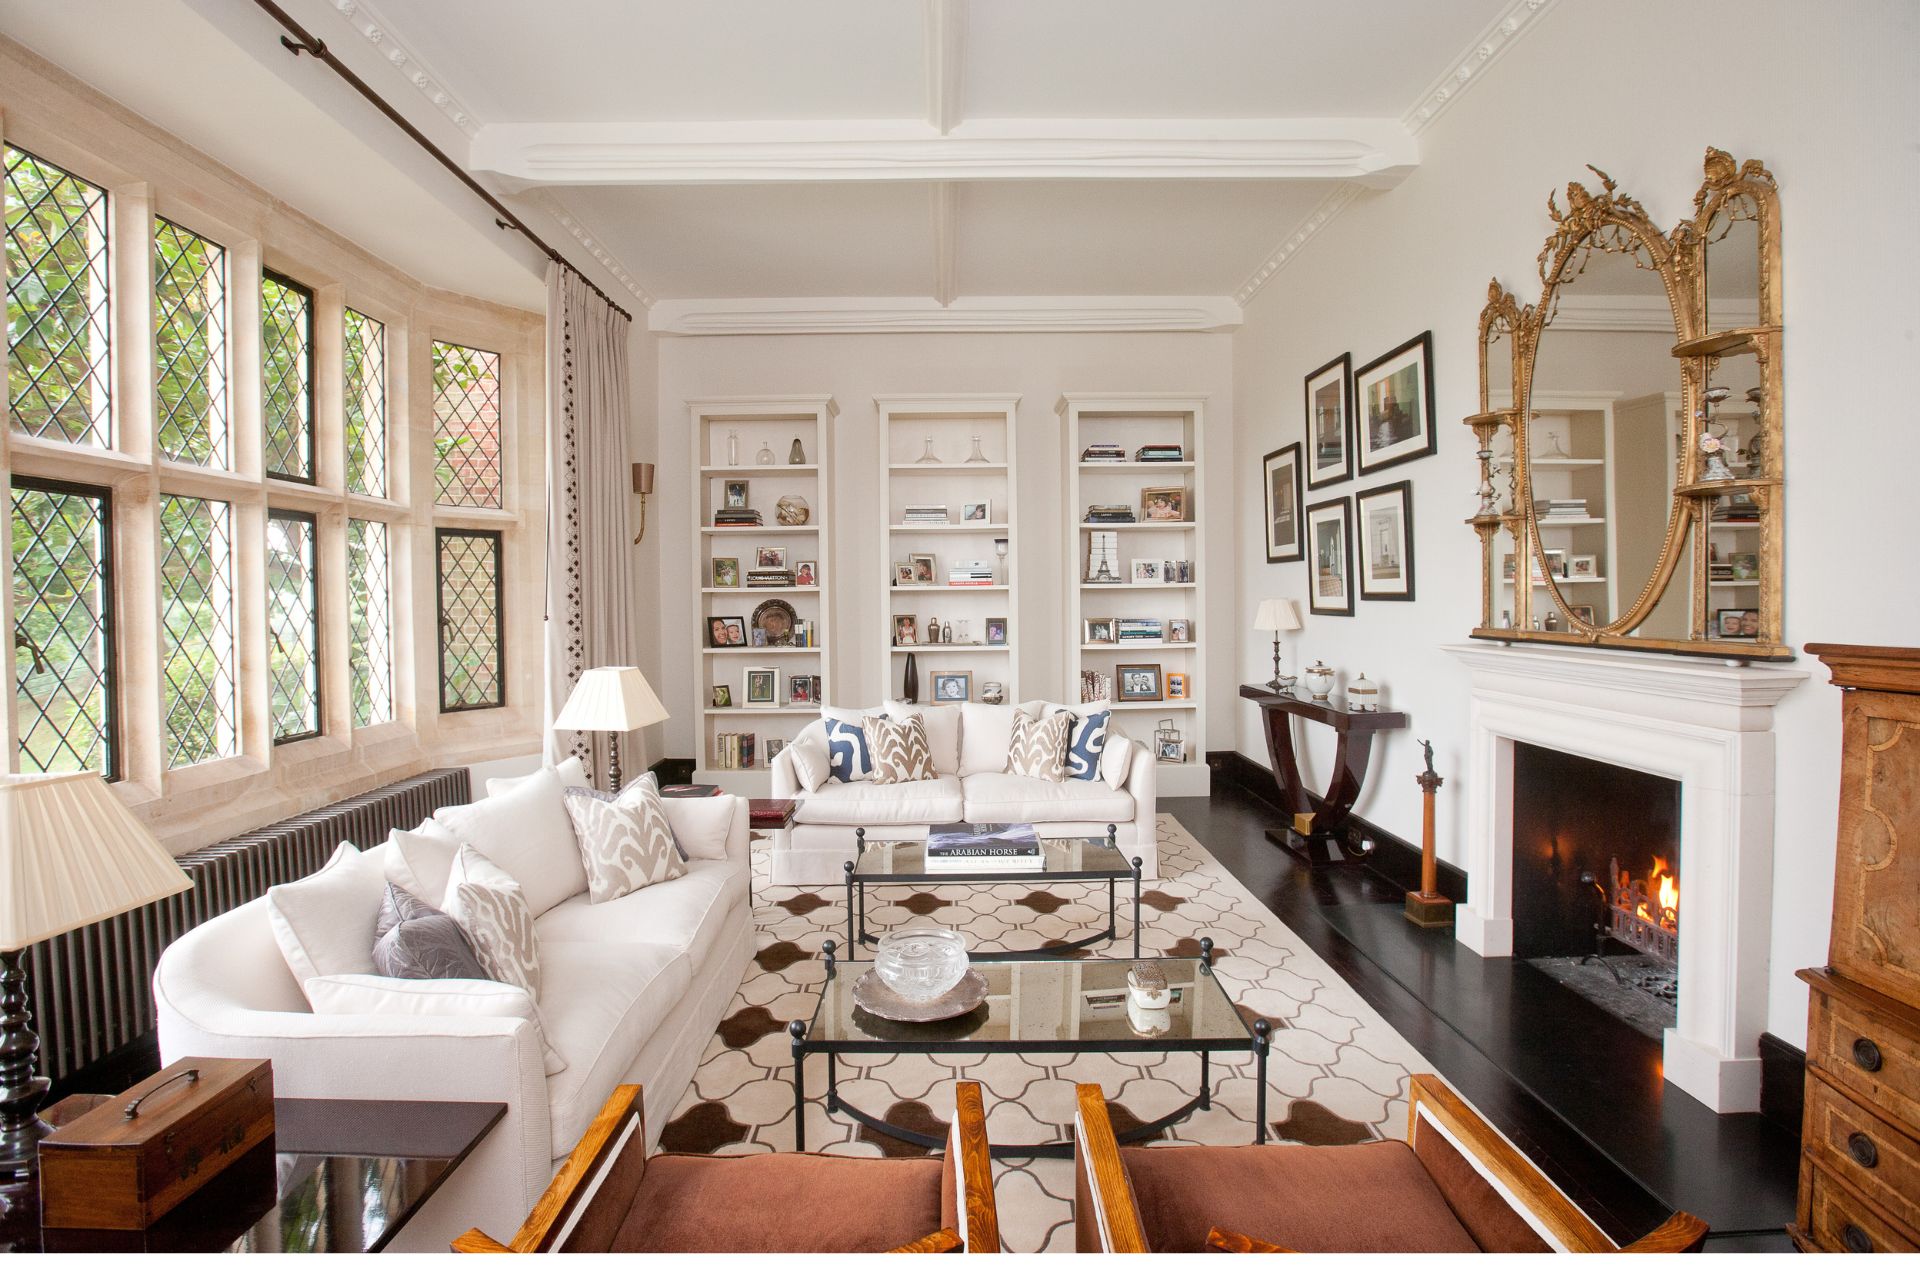 Living room with cream sofas, a marble fireplace and white bookshelves.